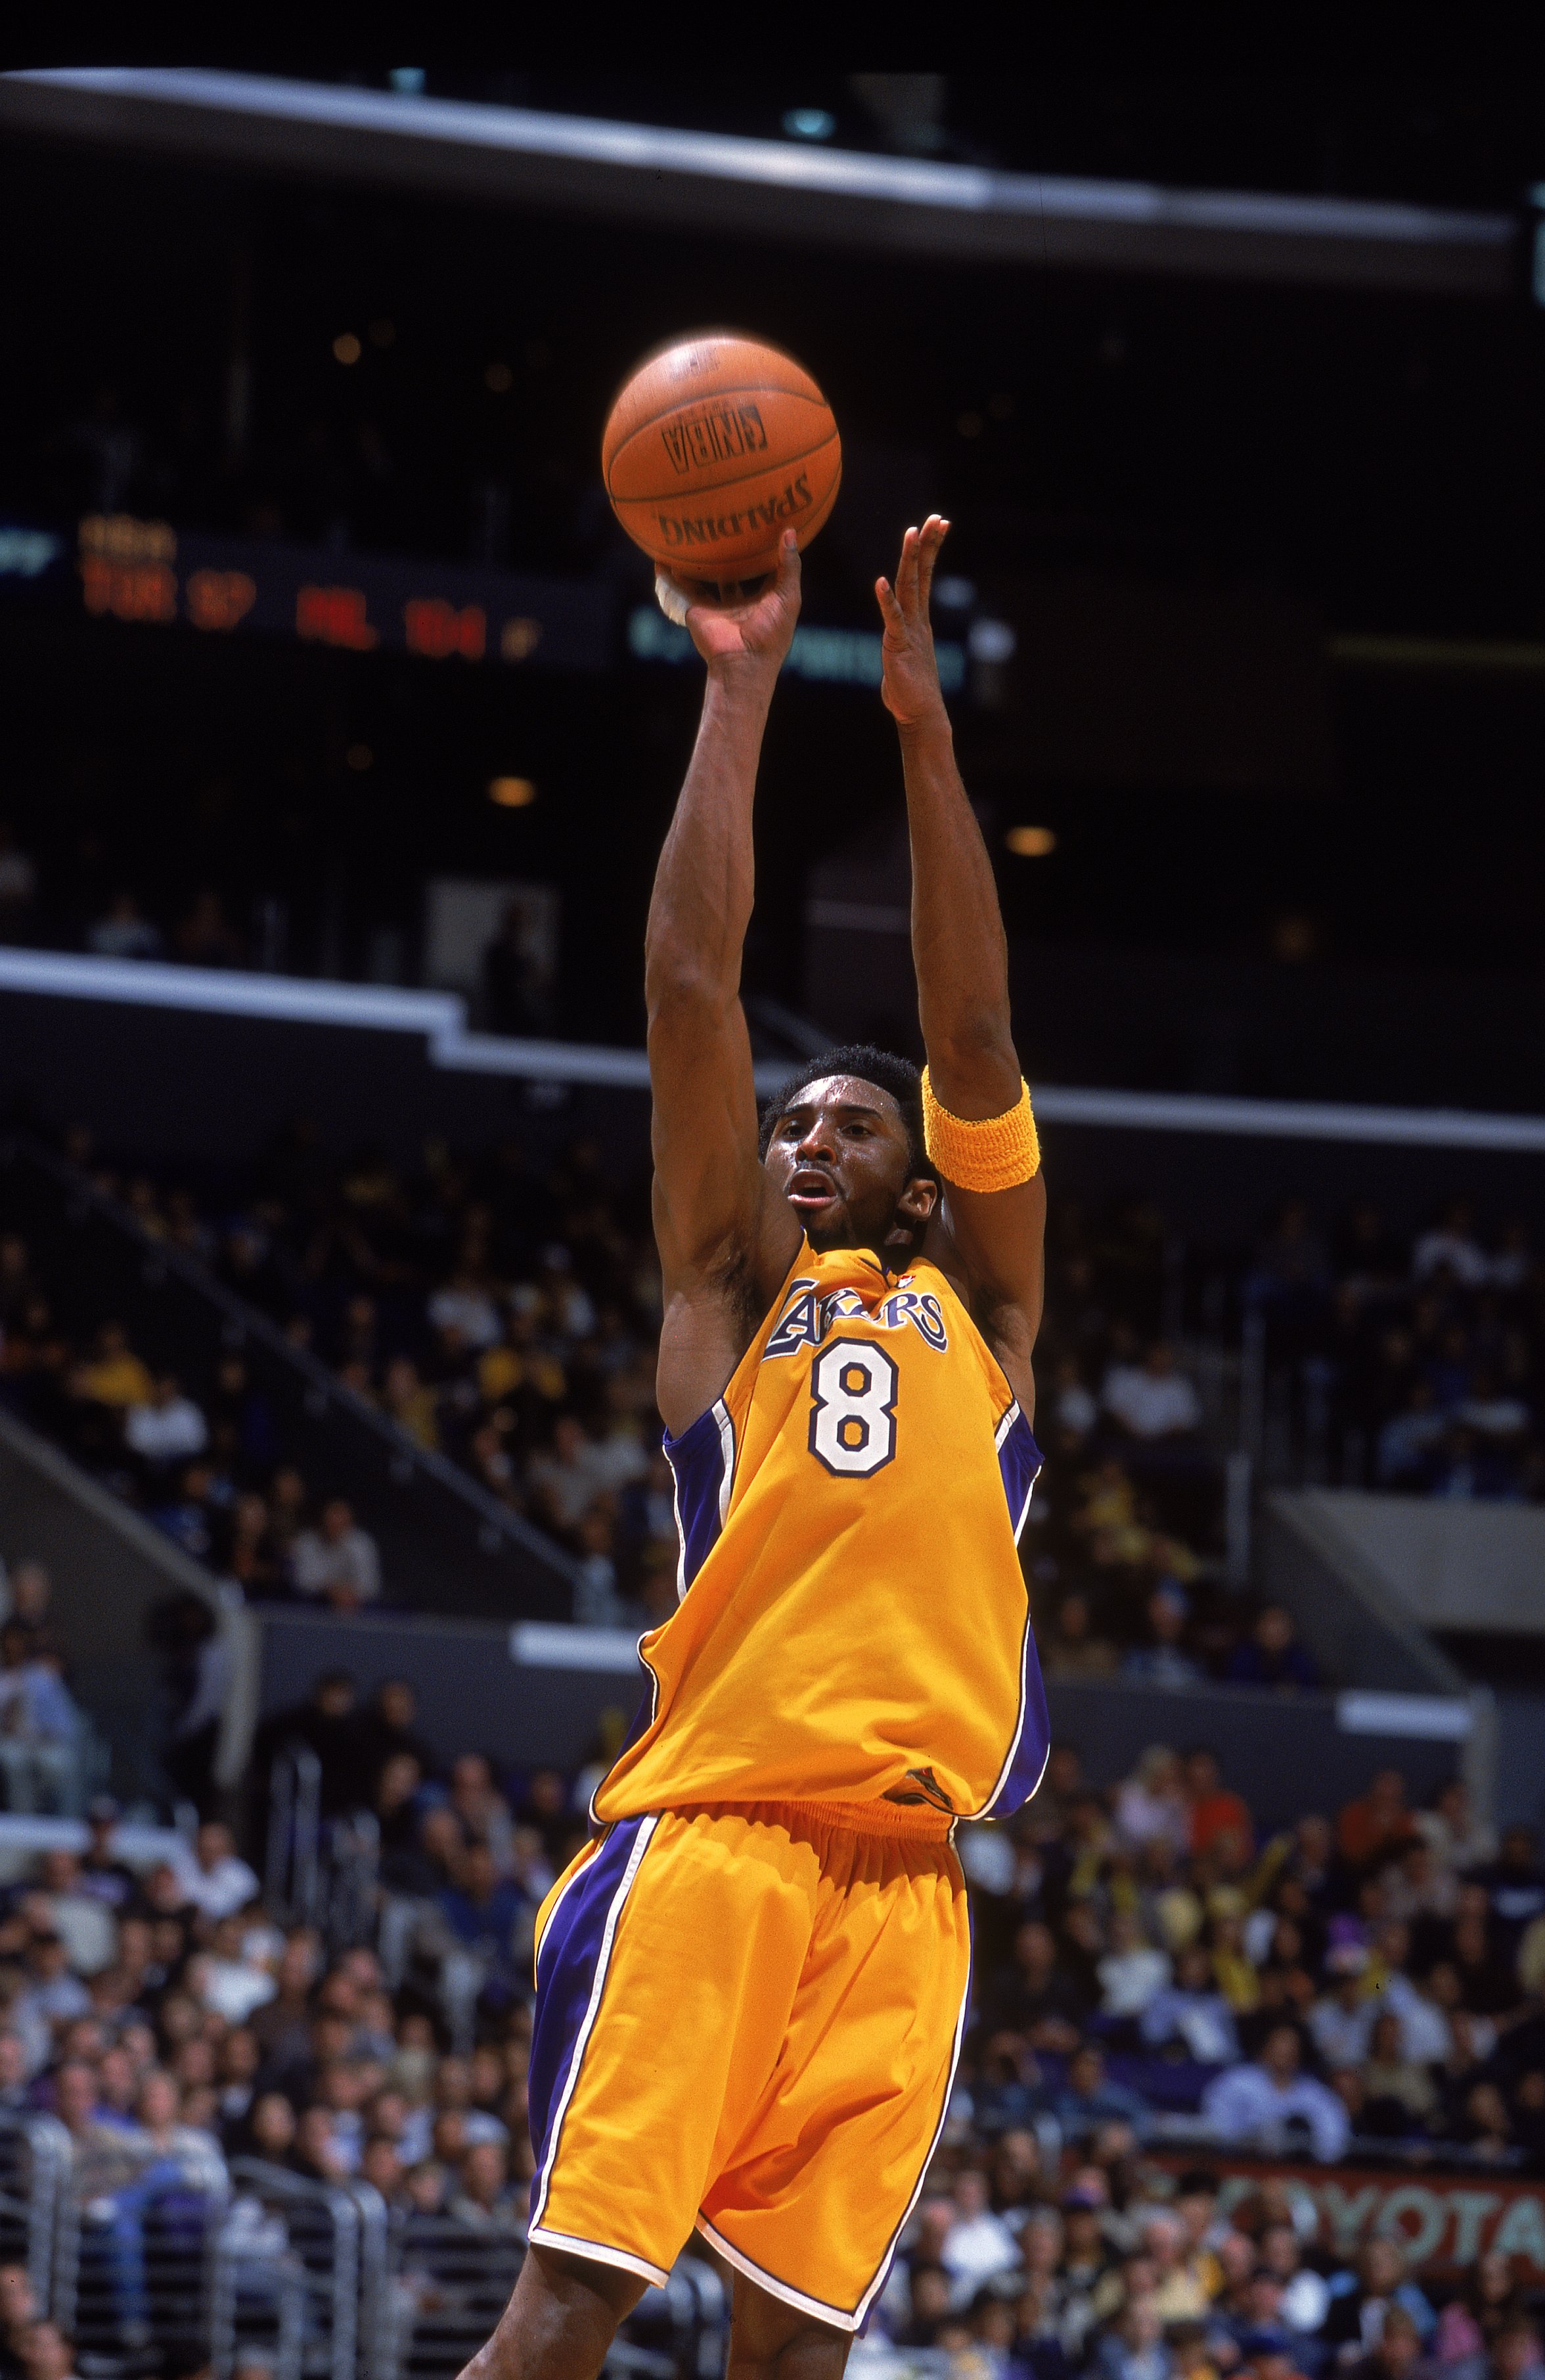 15 Dec 2000:  Kobe Bryant #8 of the Los Angeles Lakers jumps to shoot the ball during the game against the Vancouver Grizzlies at the STAPLES Center in Los Angeles, California.  The Lakers defeated the Grizzlies 98-76.    NOTE TO USER: It is expressly und